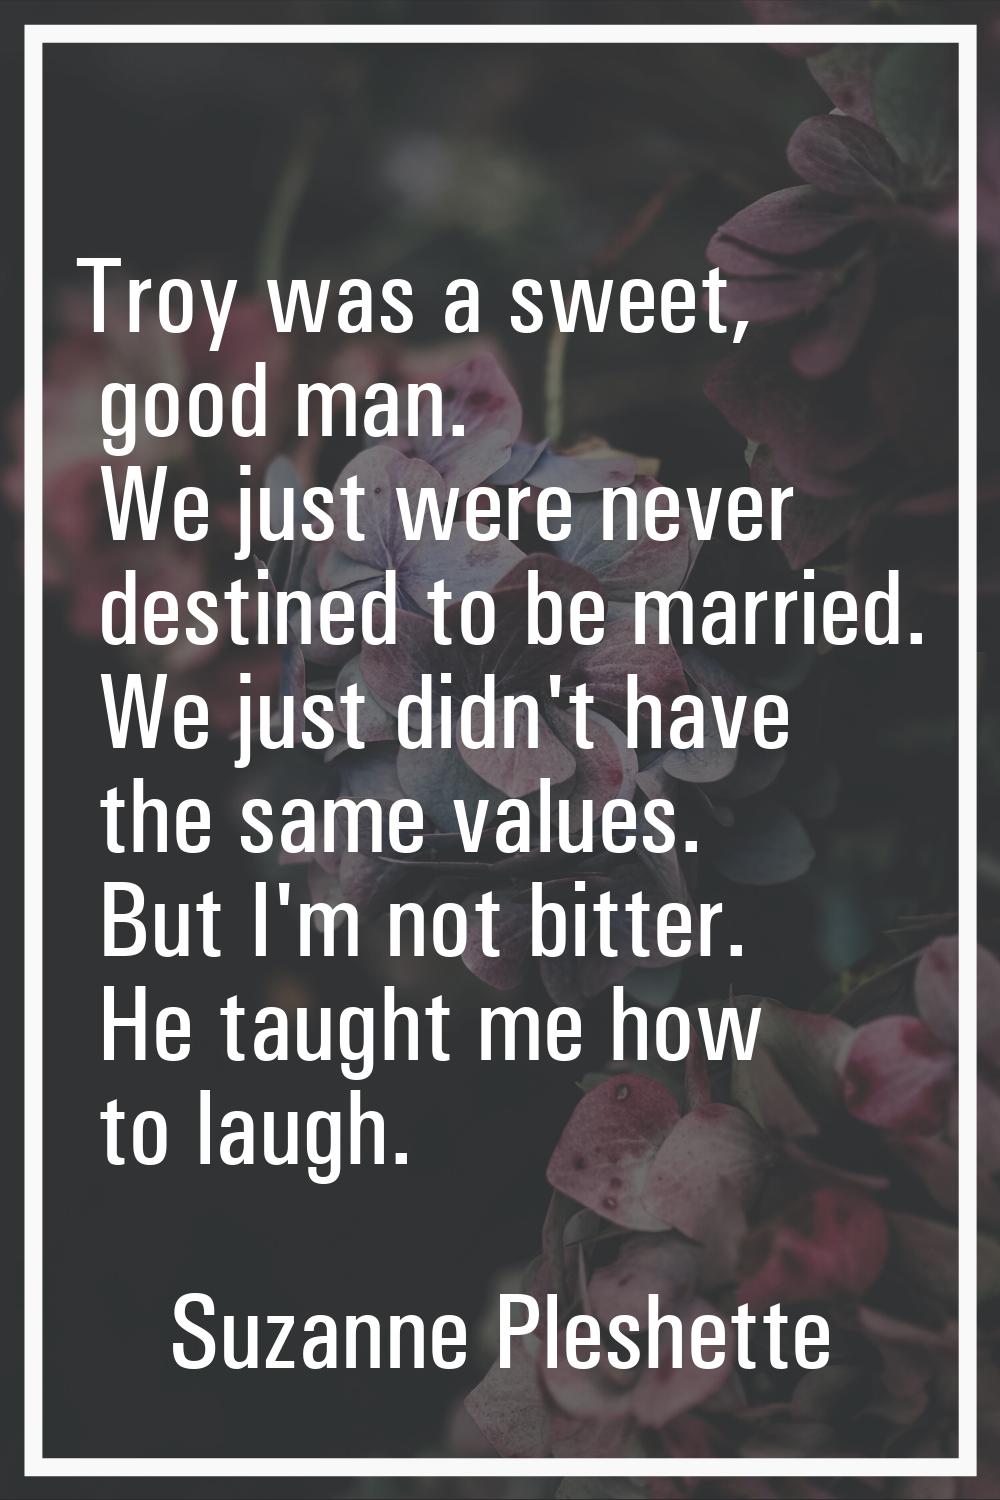 Troy was a sweet, good man. We just were never destined to be married. We just didn't have the same